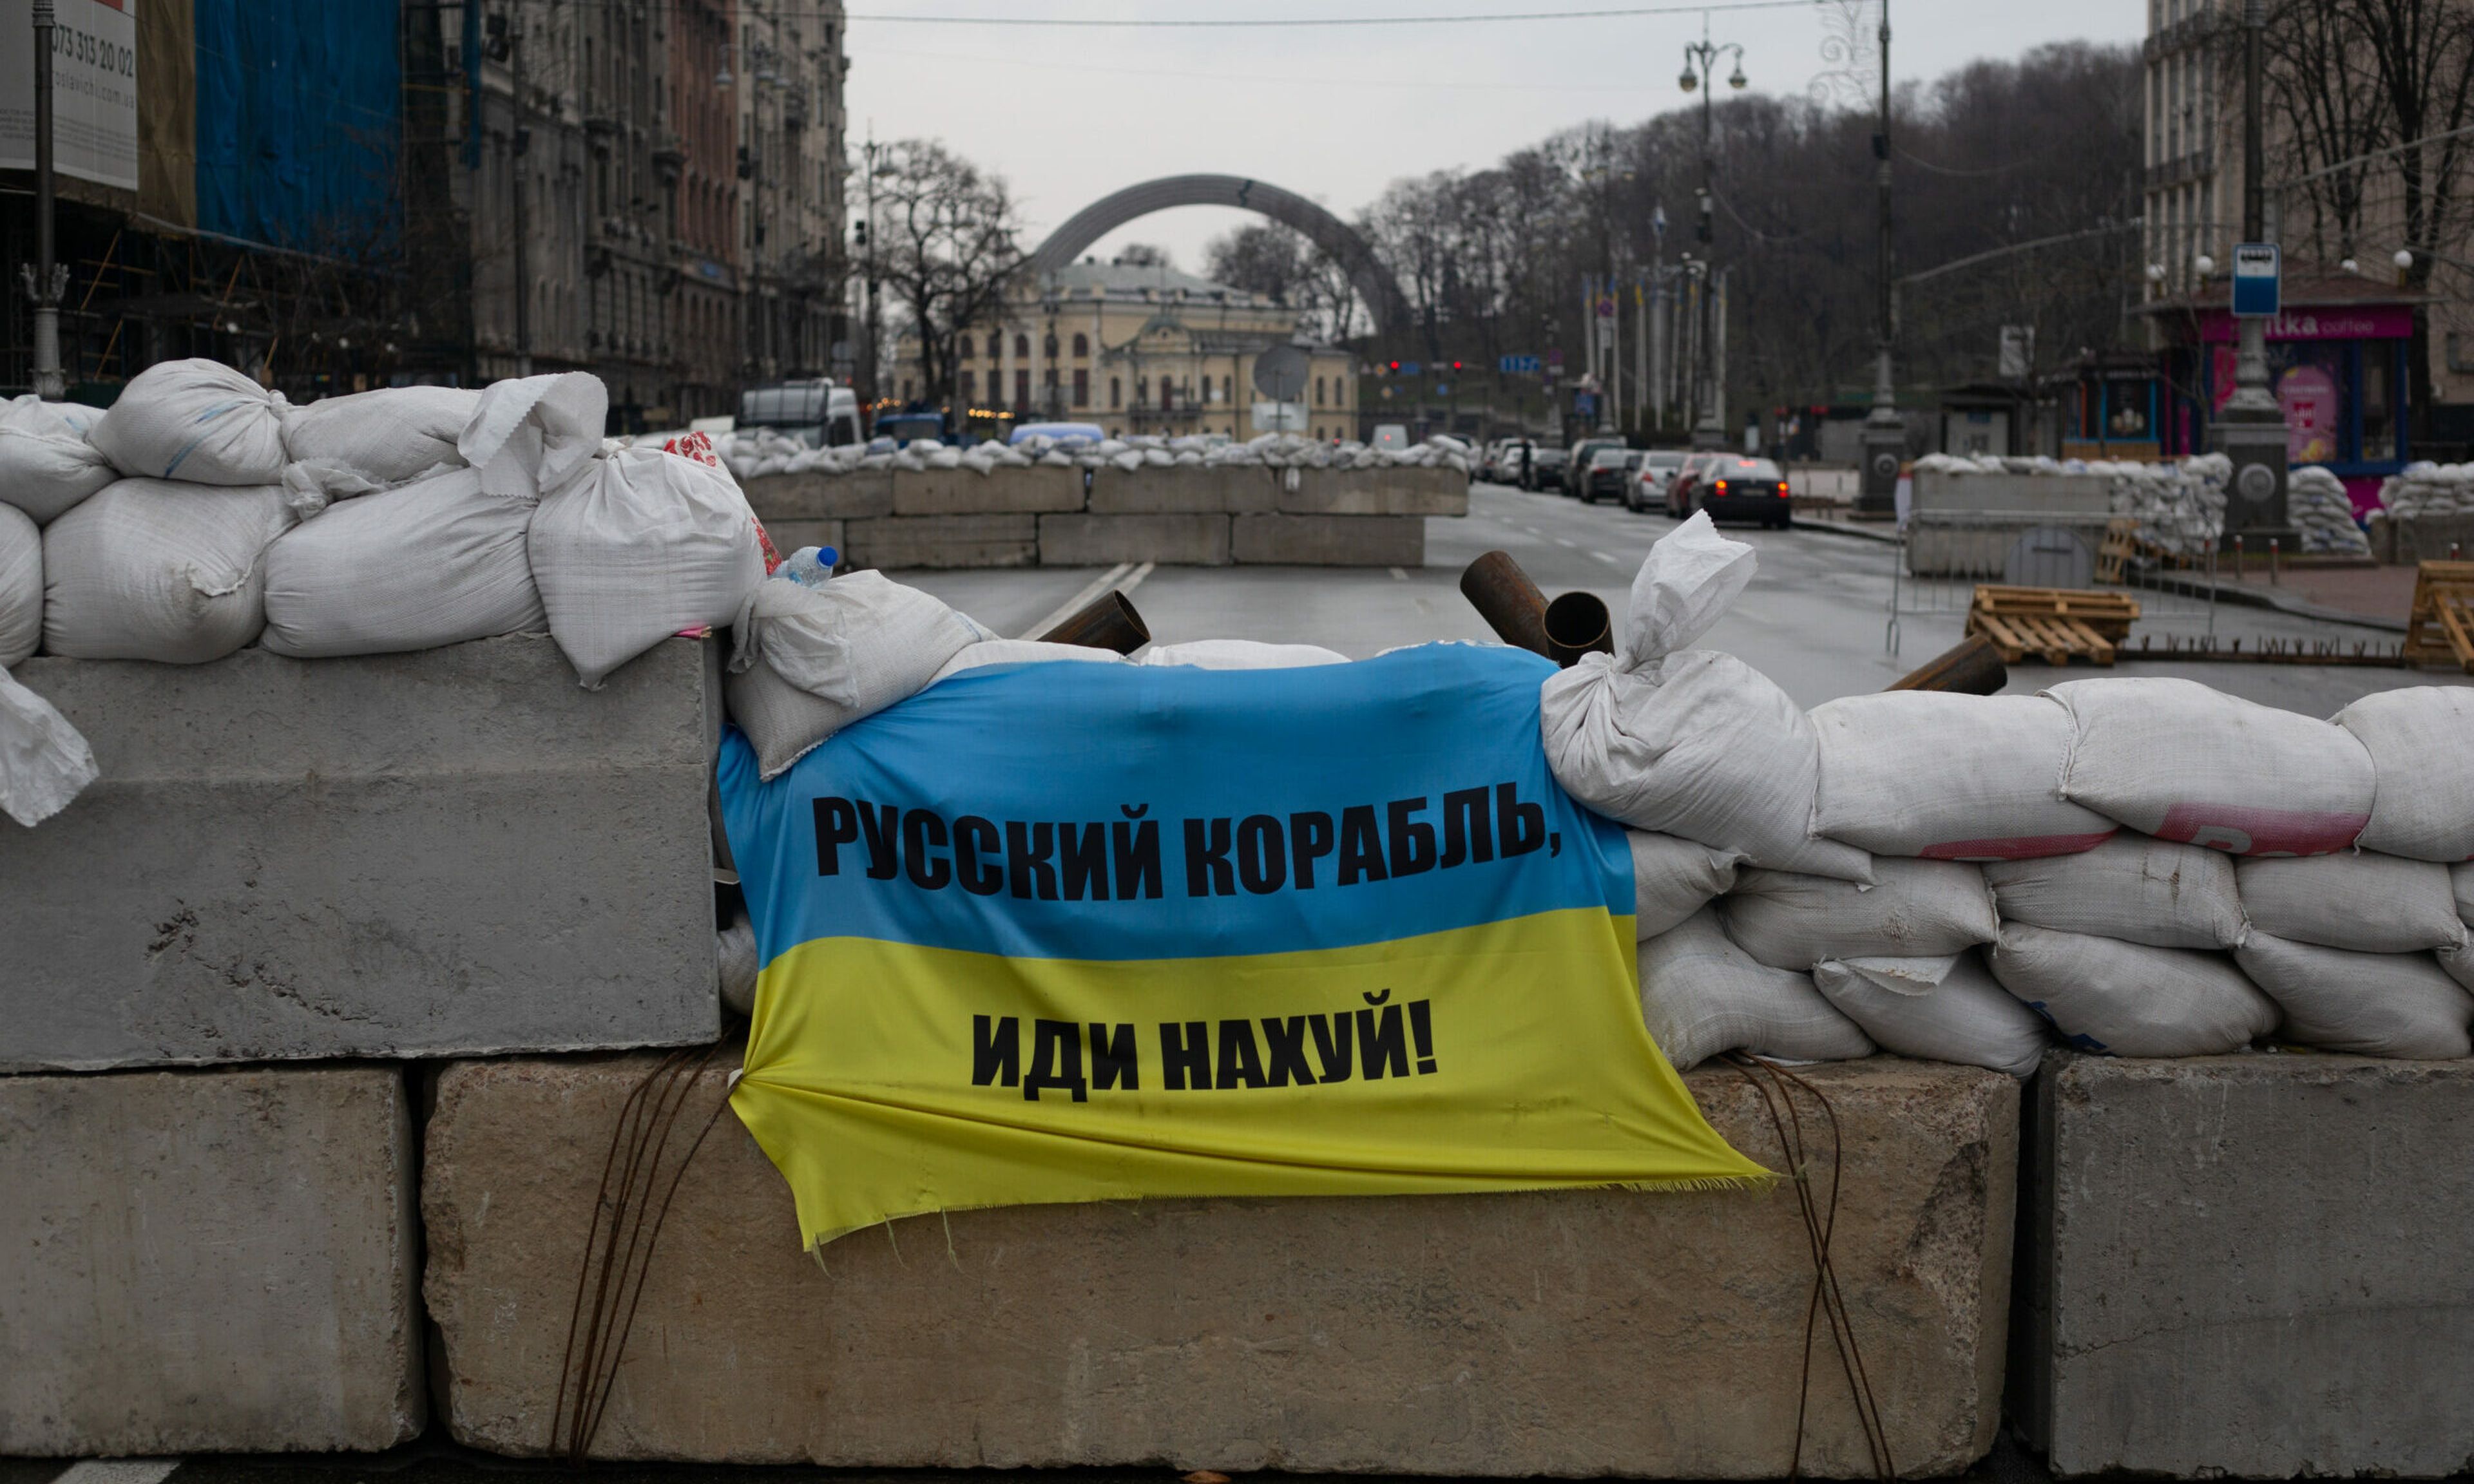 KYIV, UKRAINE &#8211; MARCH 30: A view of the Ukrainian flag with a signature &#8220;Russian ship, go f*ck yourself&#8221; as seen on the checkpoint in the Independence Square on March 30, 2022 in Kyiv, Ukraine. Local officials reported fresh attacks on the outskirts of Kyiv, despite yesterday&#8217;s announcement from Russia that it would &#8220;r...